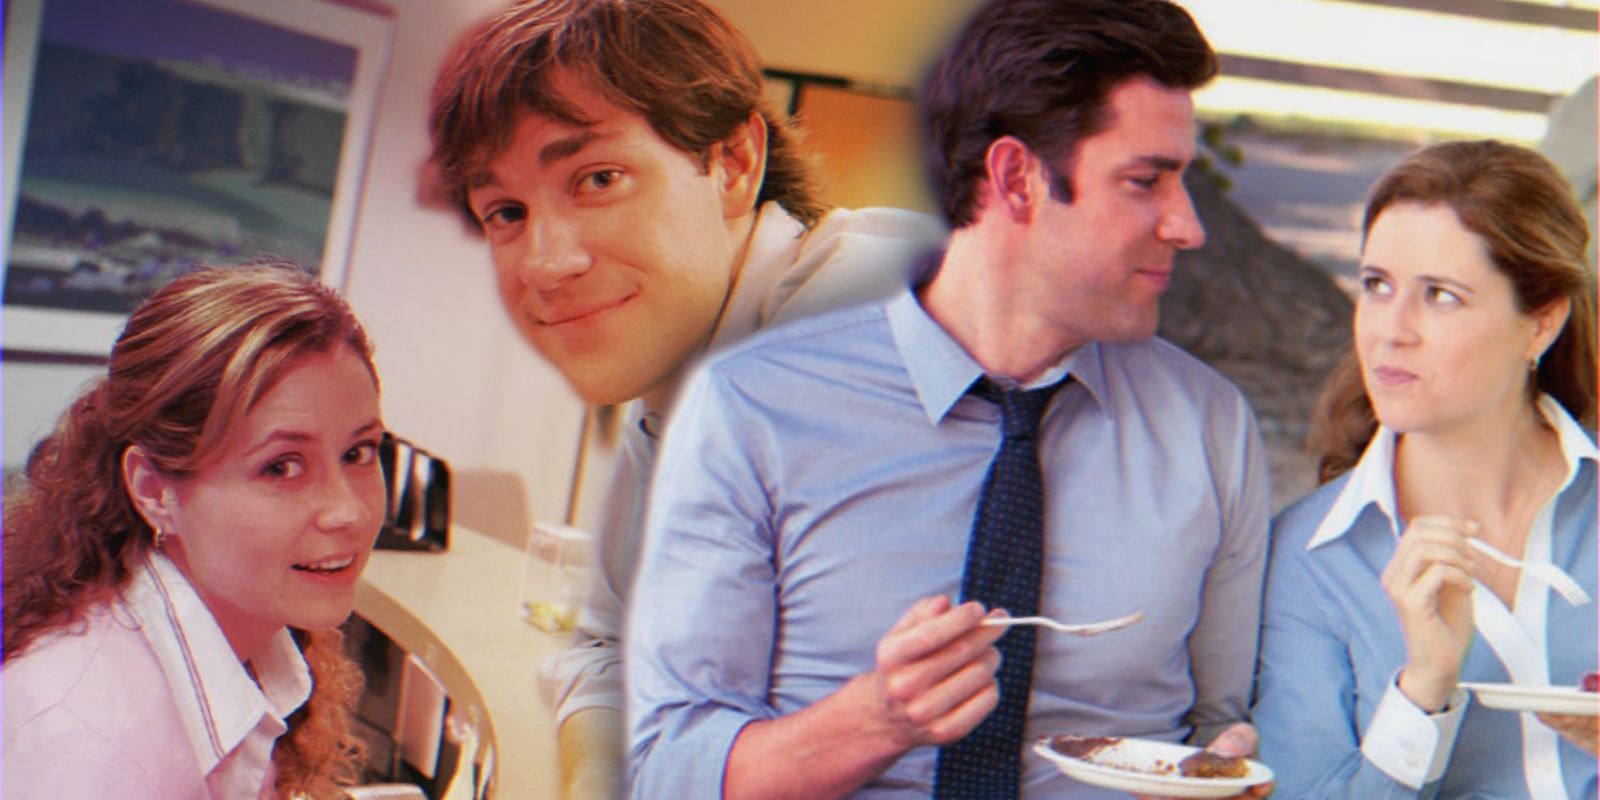 Image of Jim and Pam from The Office Season 1 alongside image of Jim and Pam from Season 8.